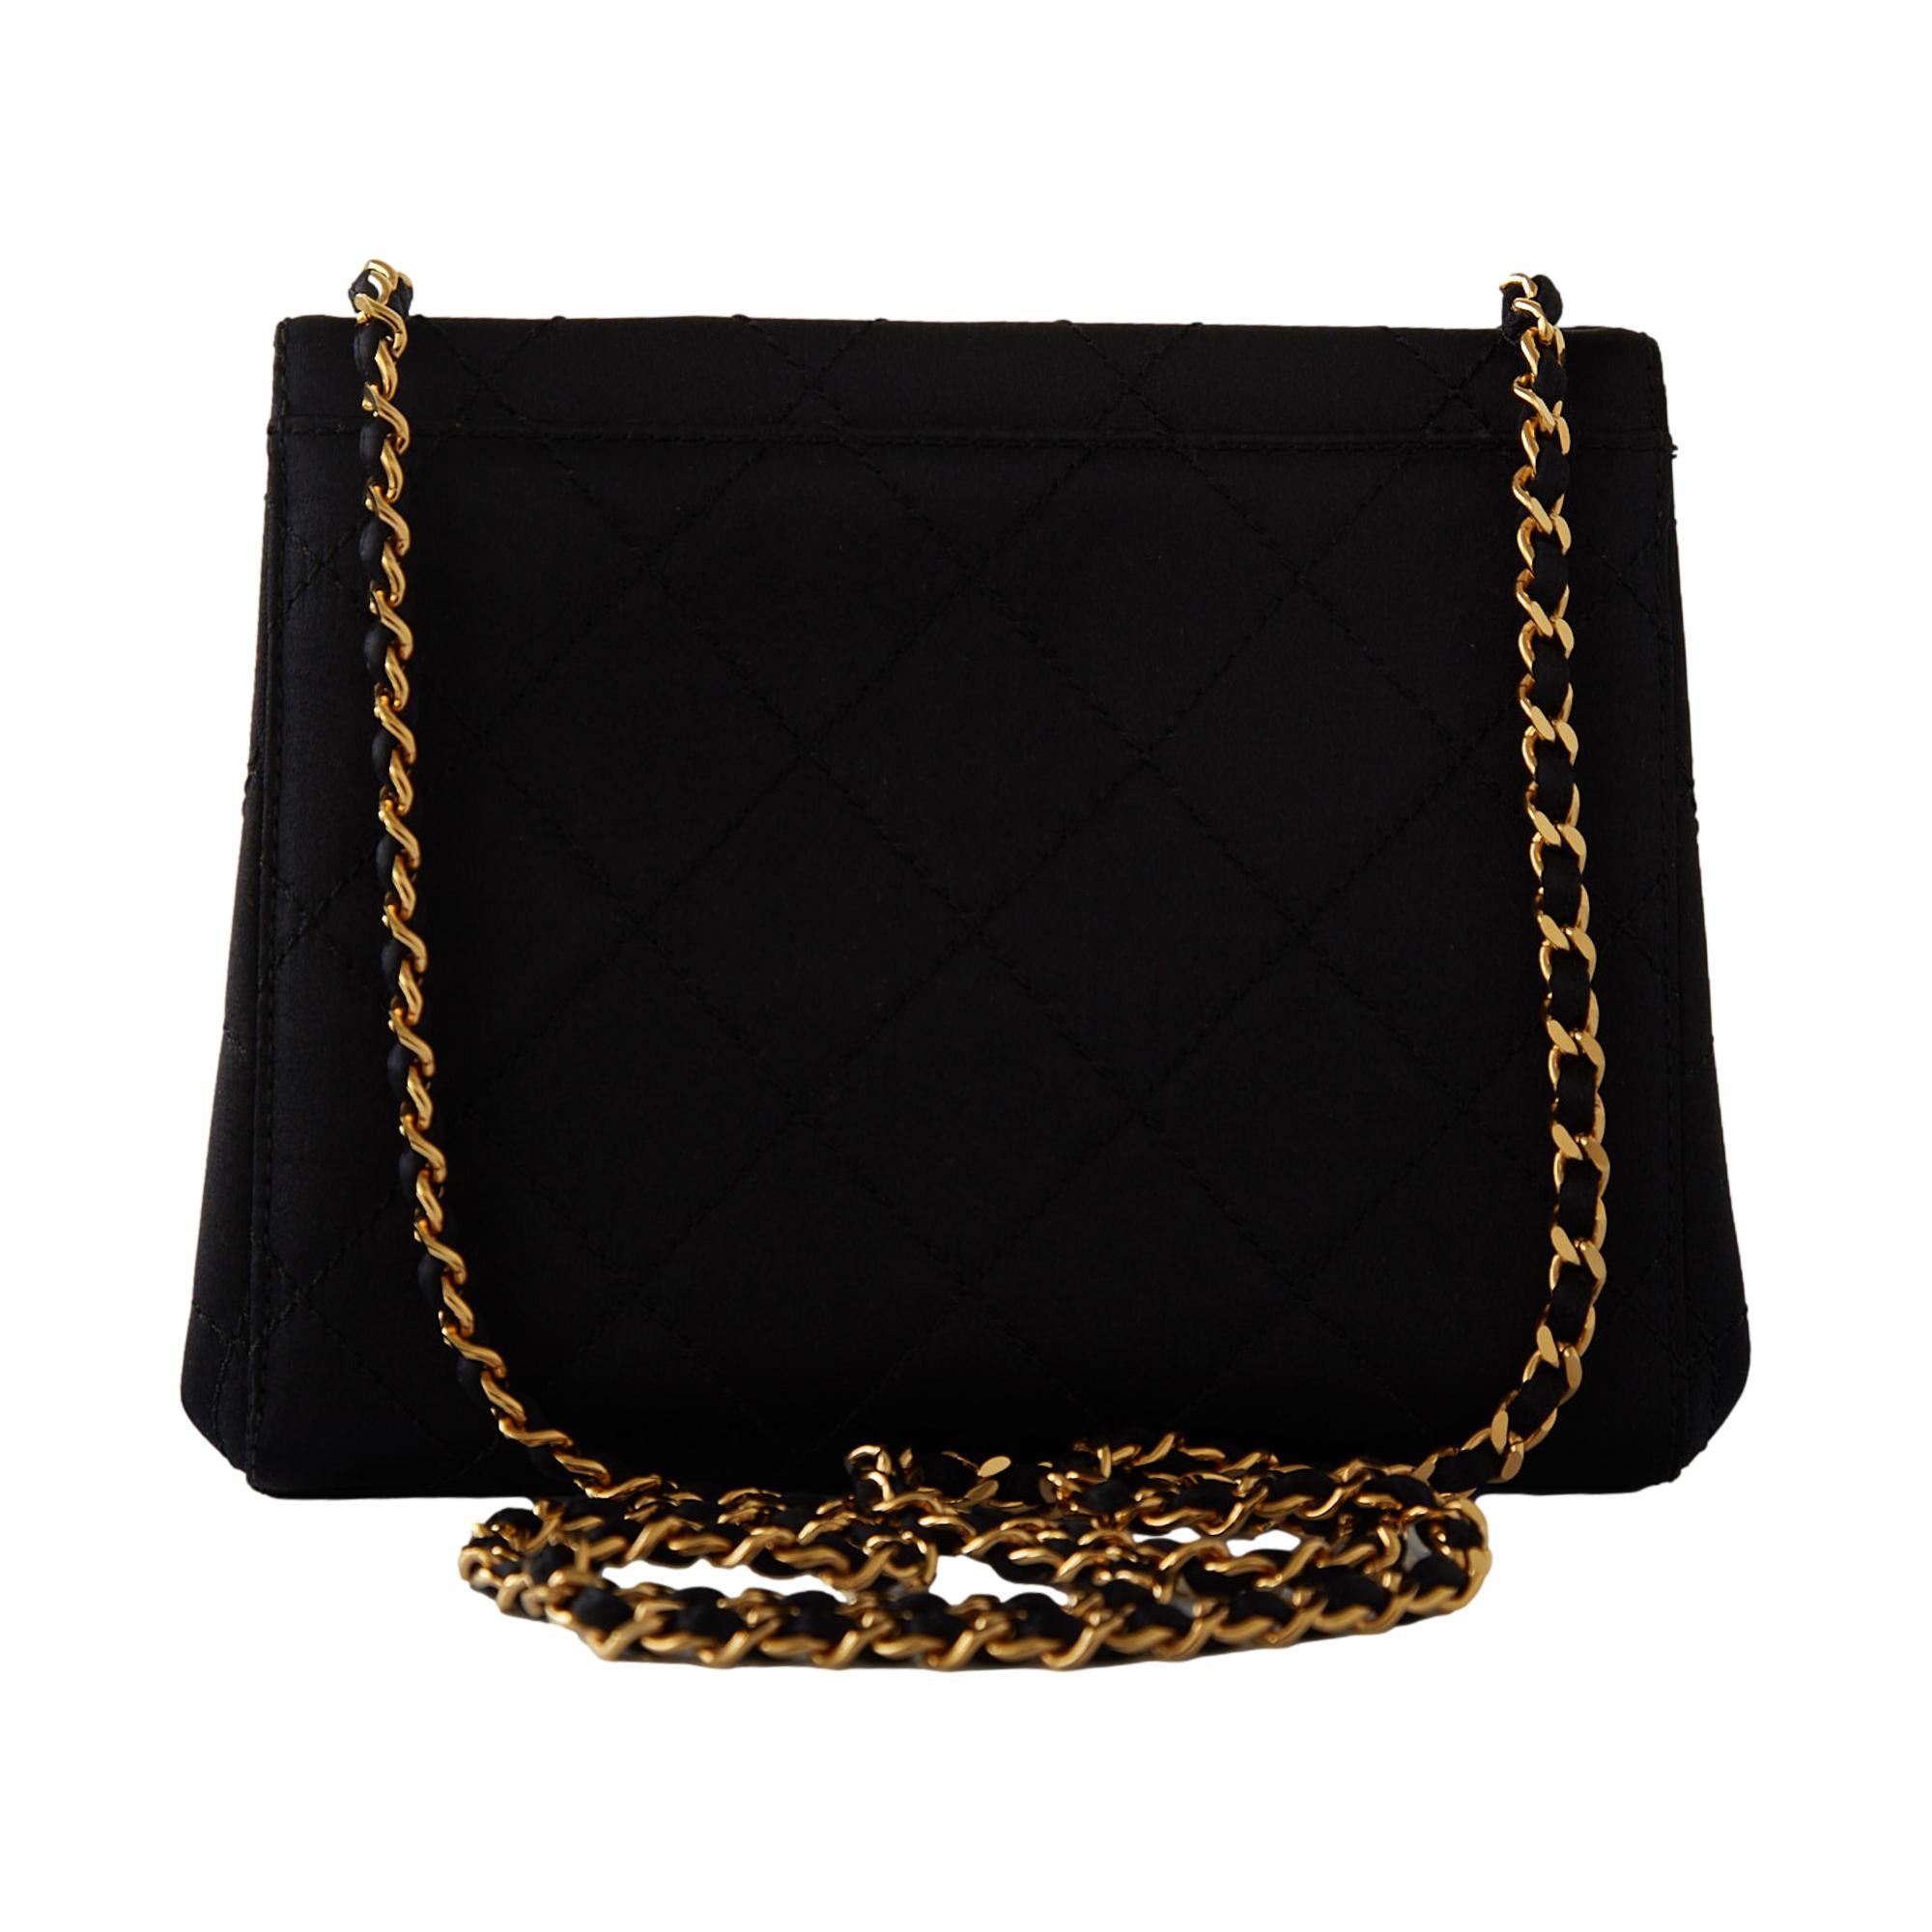 Classic Quilted Black Flap Bag with Gold Chain. Women Fashion Clutch. Small  Leather Elegant Purse Stock Vector - Illustration of golden, black:  228112595